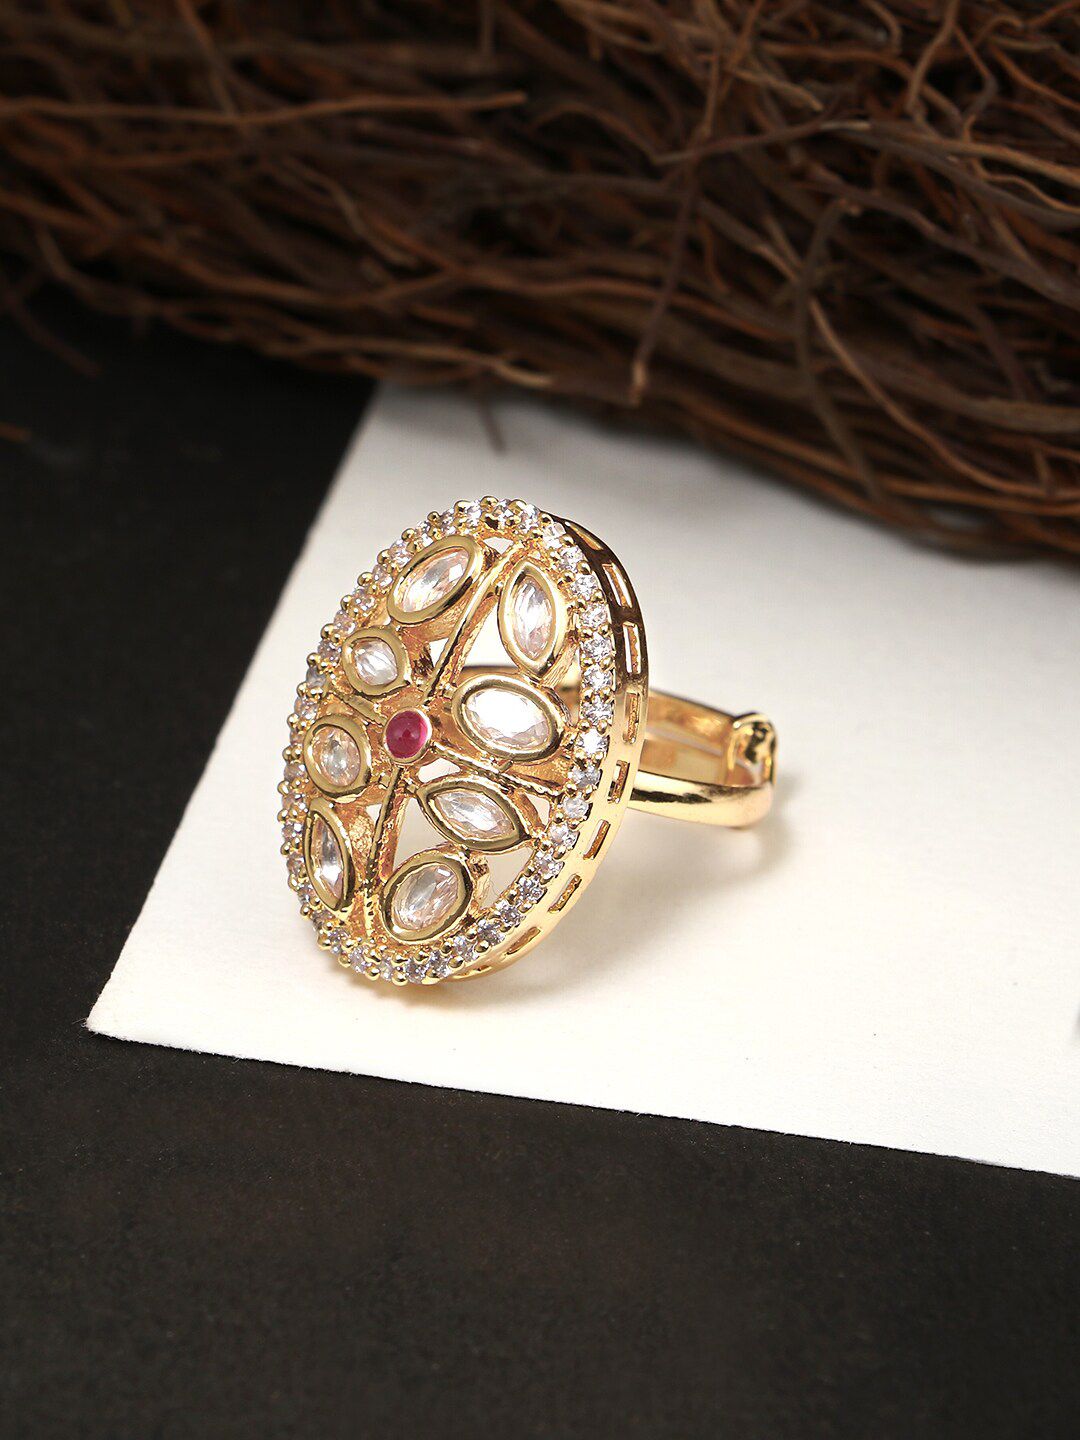 Adwitiya Collection 24CT Gold-Plated White & Maroon Oval Kundan Adjustable Finger Ring Price in India